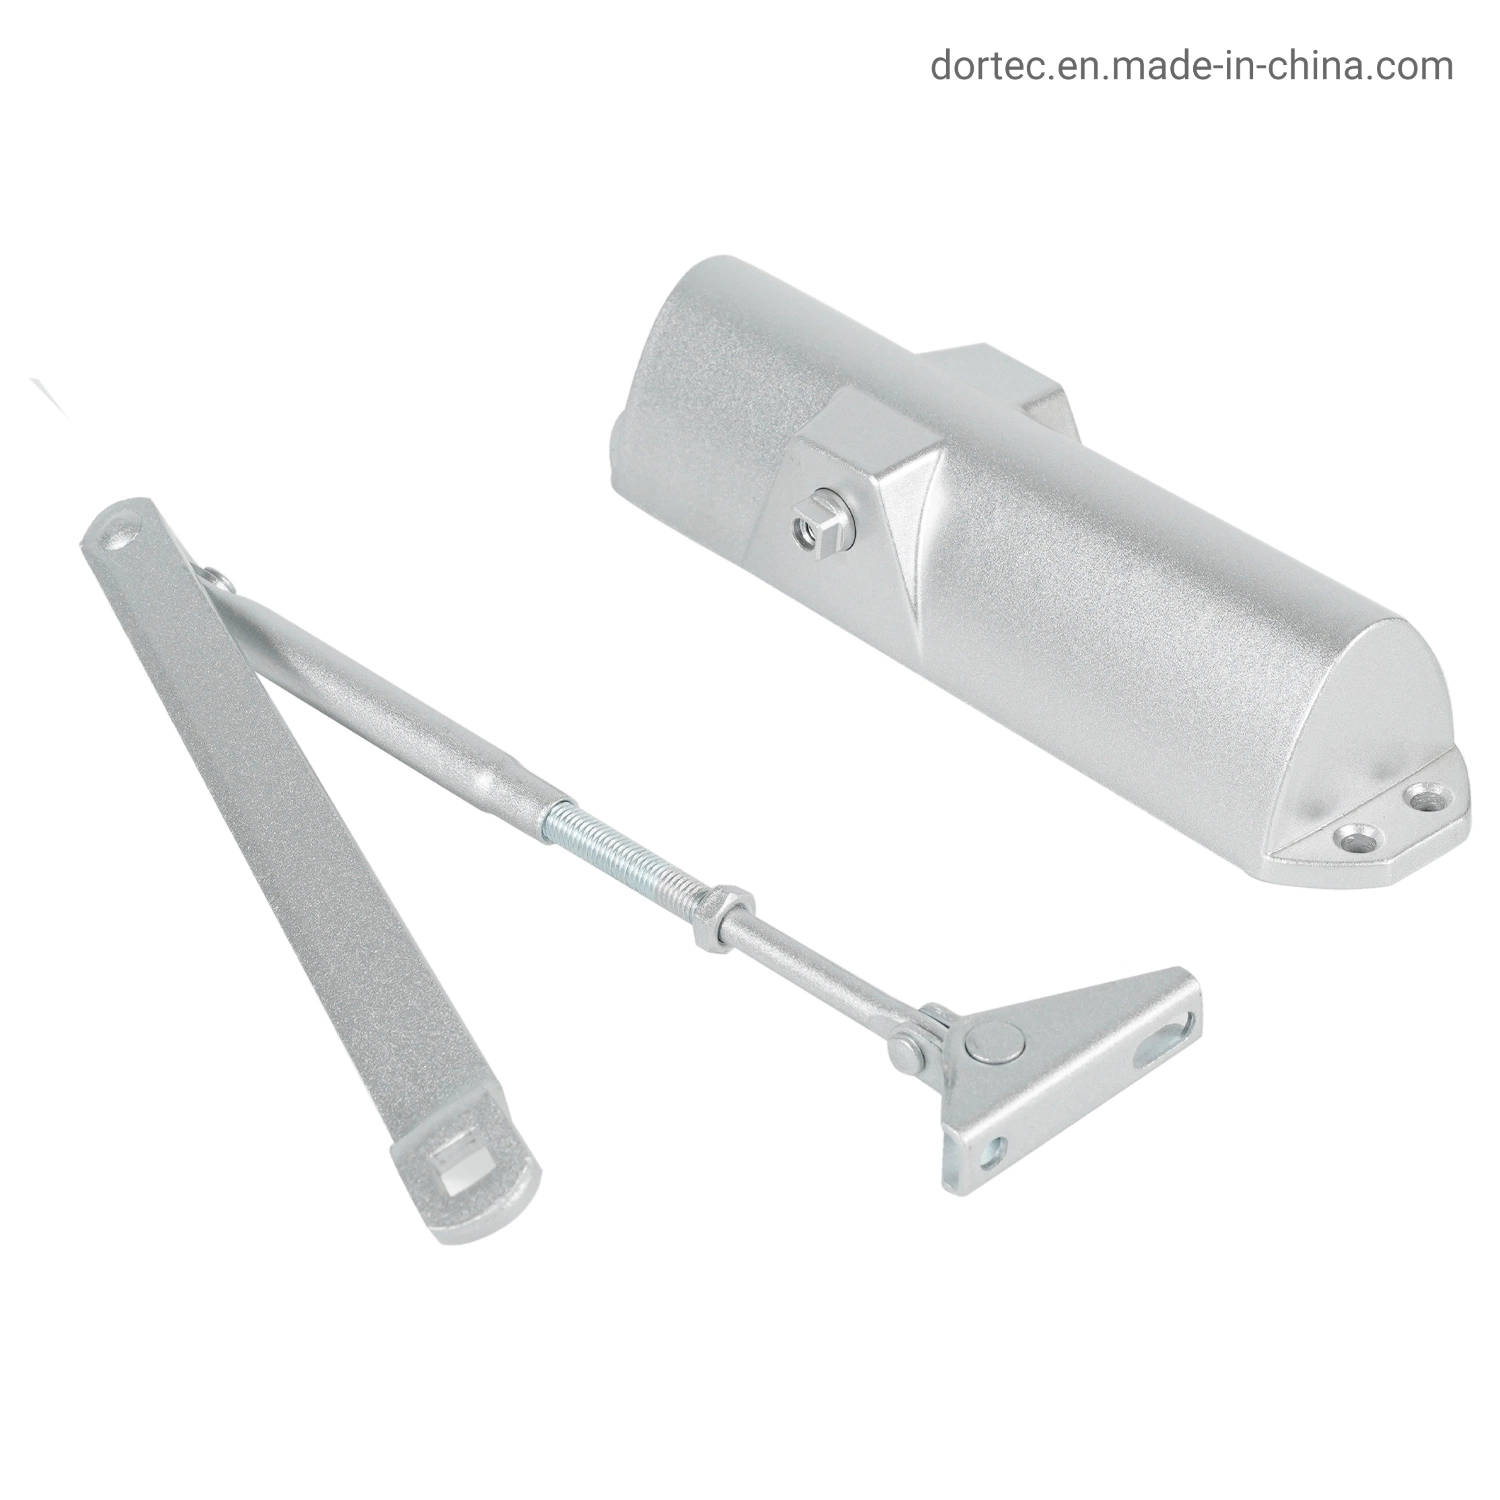 Best Residental Door Closer Home Hardware Manufacture in China